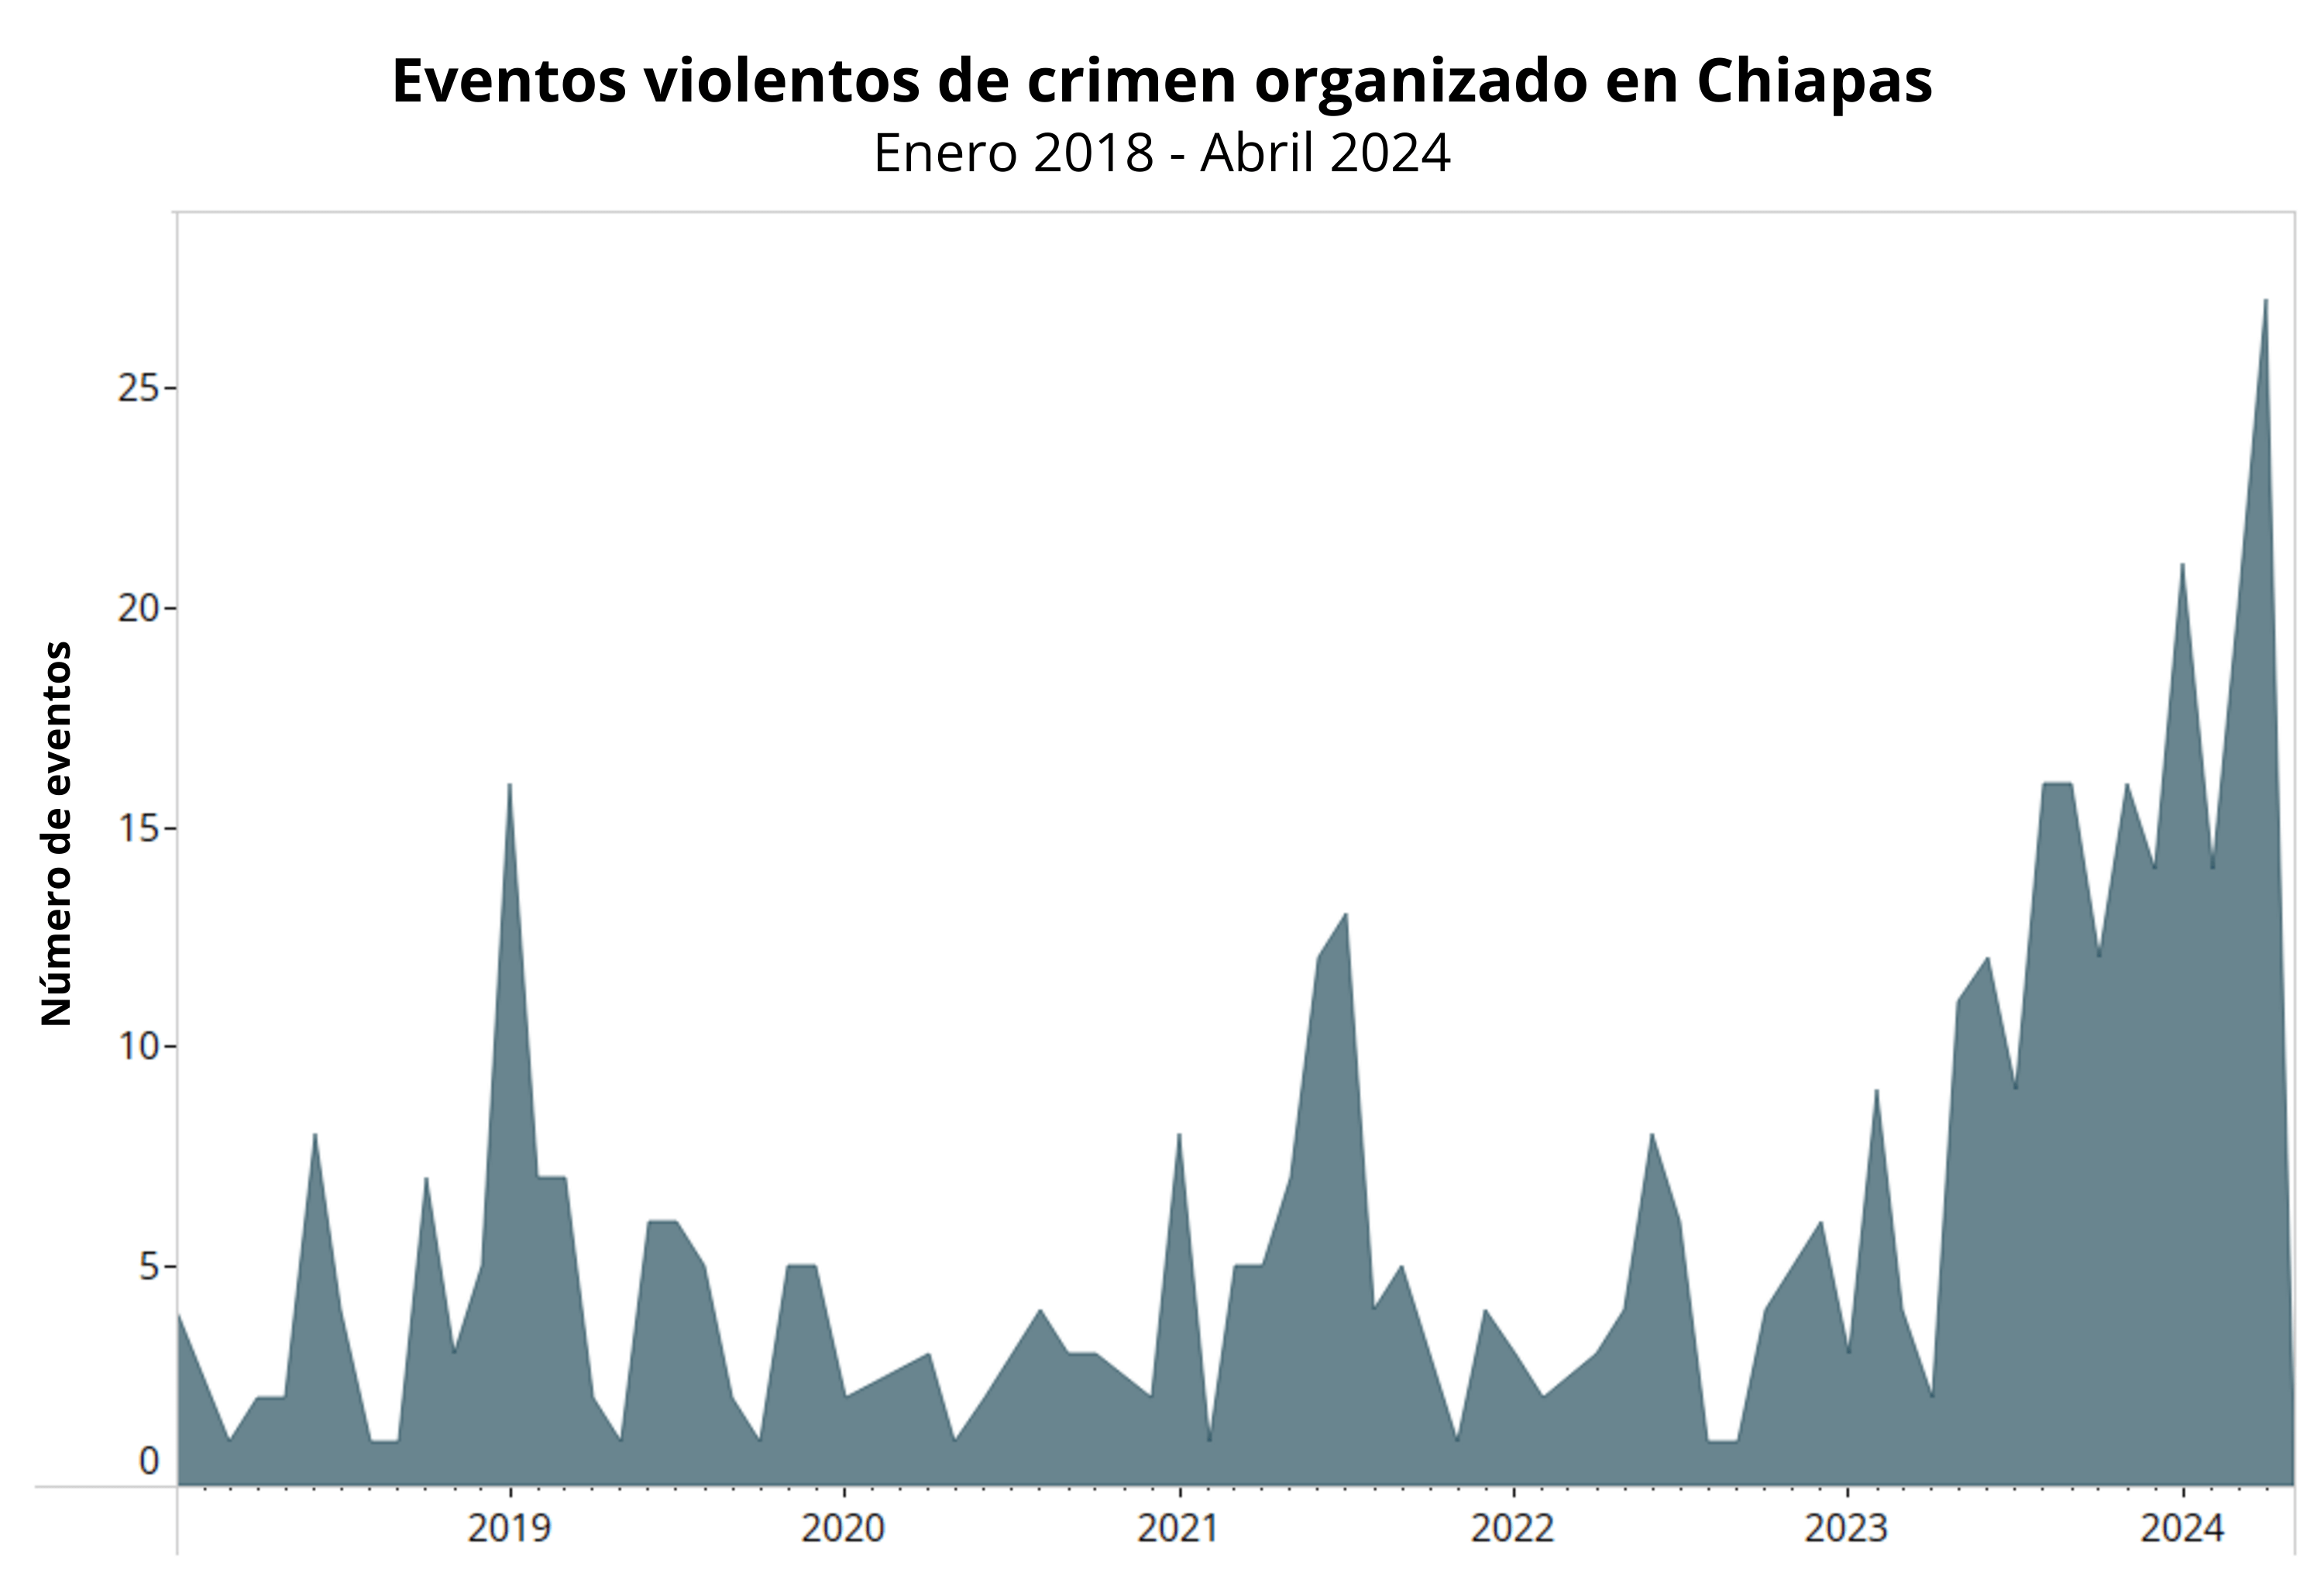 Aera Chart - Mexico - Election Watch - Gang violence in Chiapas - January 2018 to April 2024 - Spanish